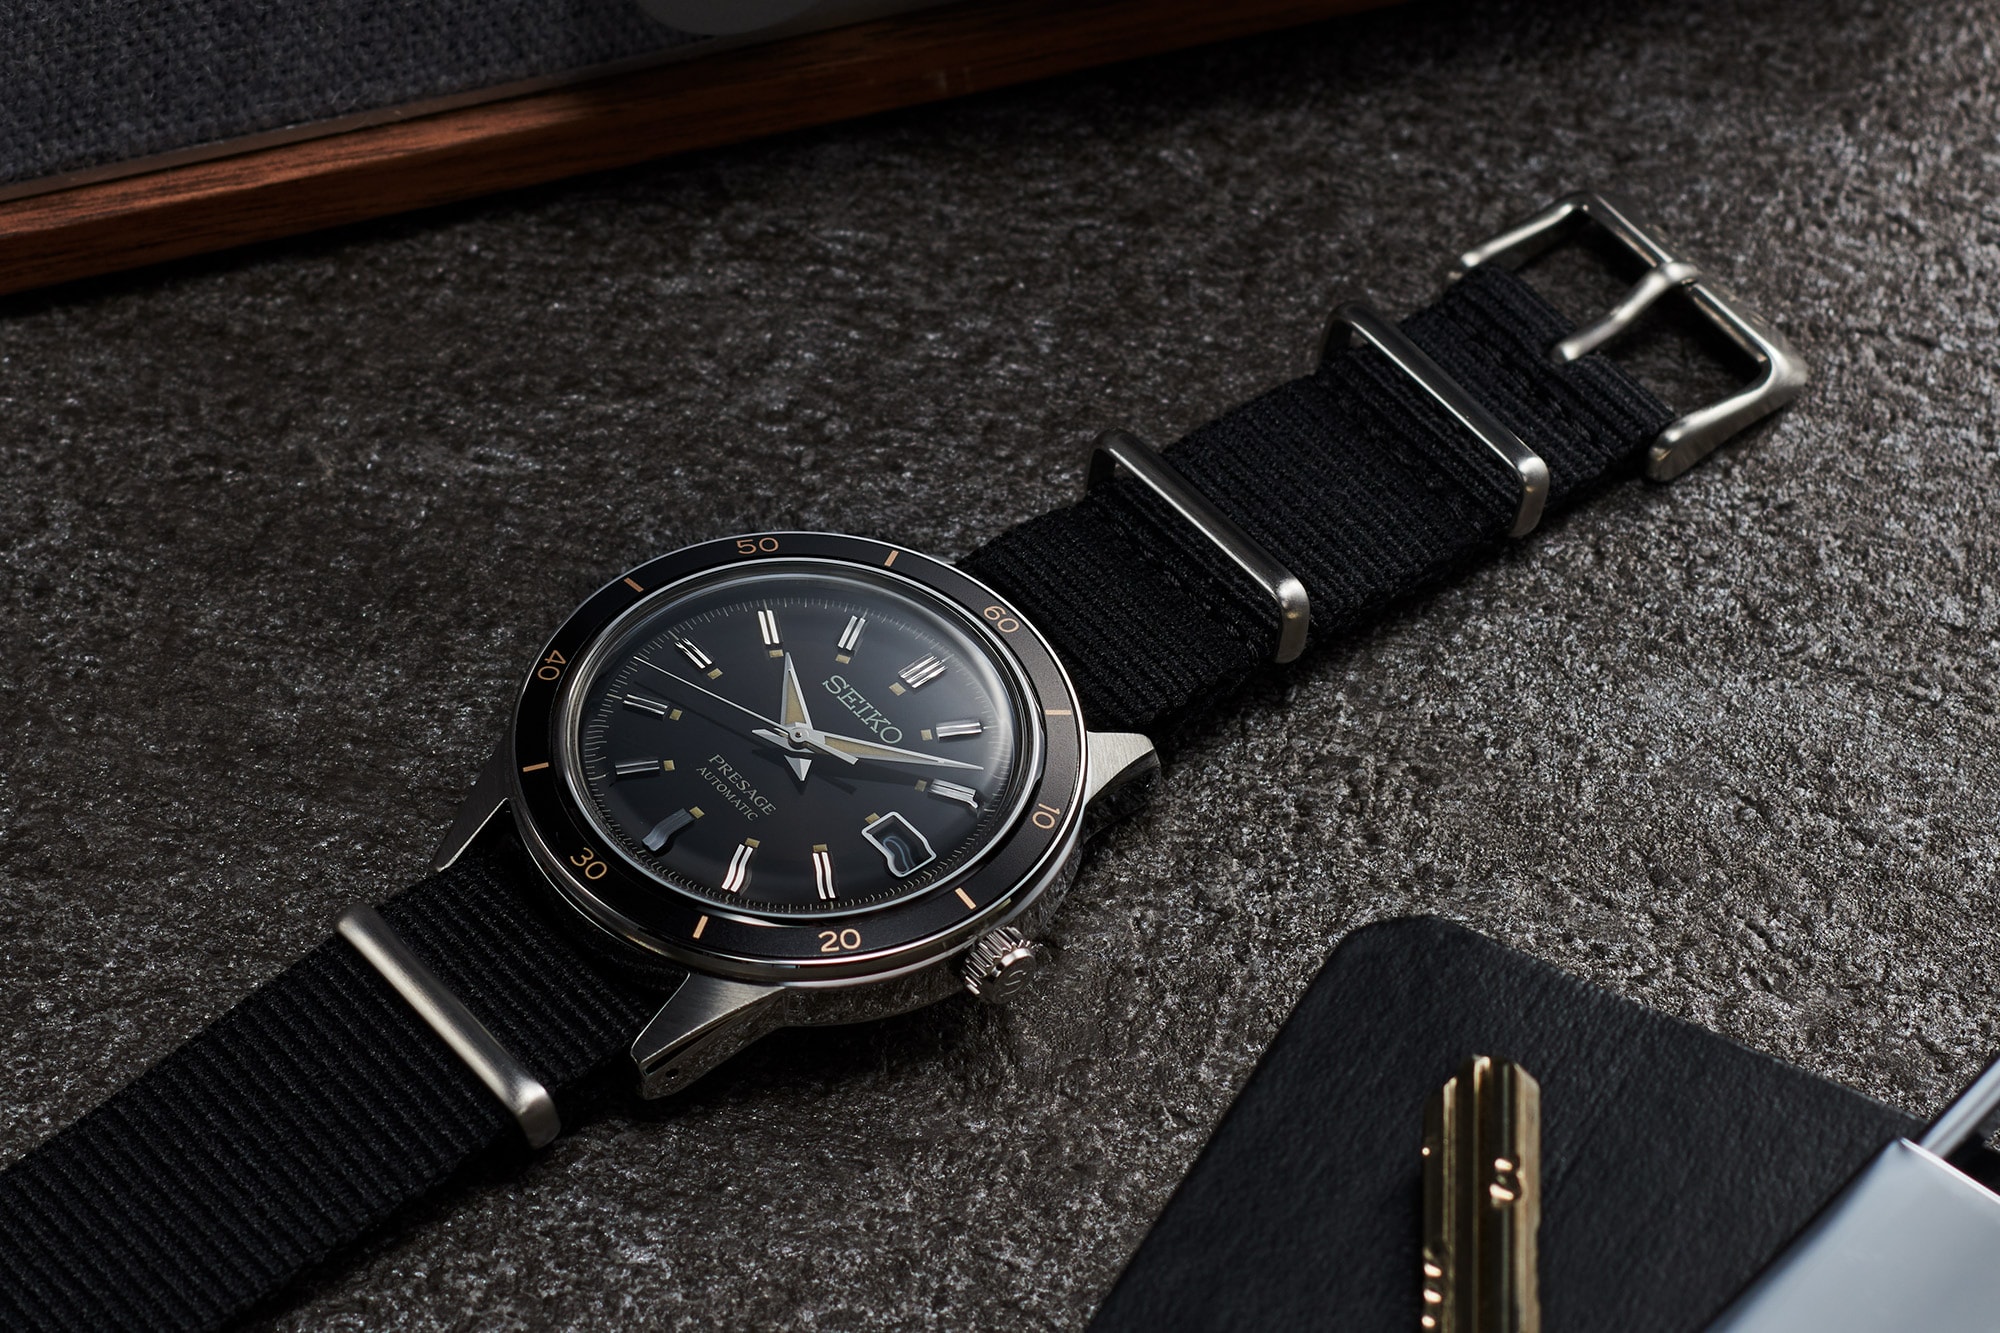 Introducing the Seiko Presage Style 60's - Worn & Wound